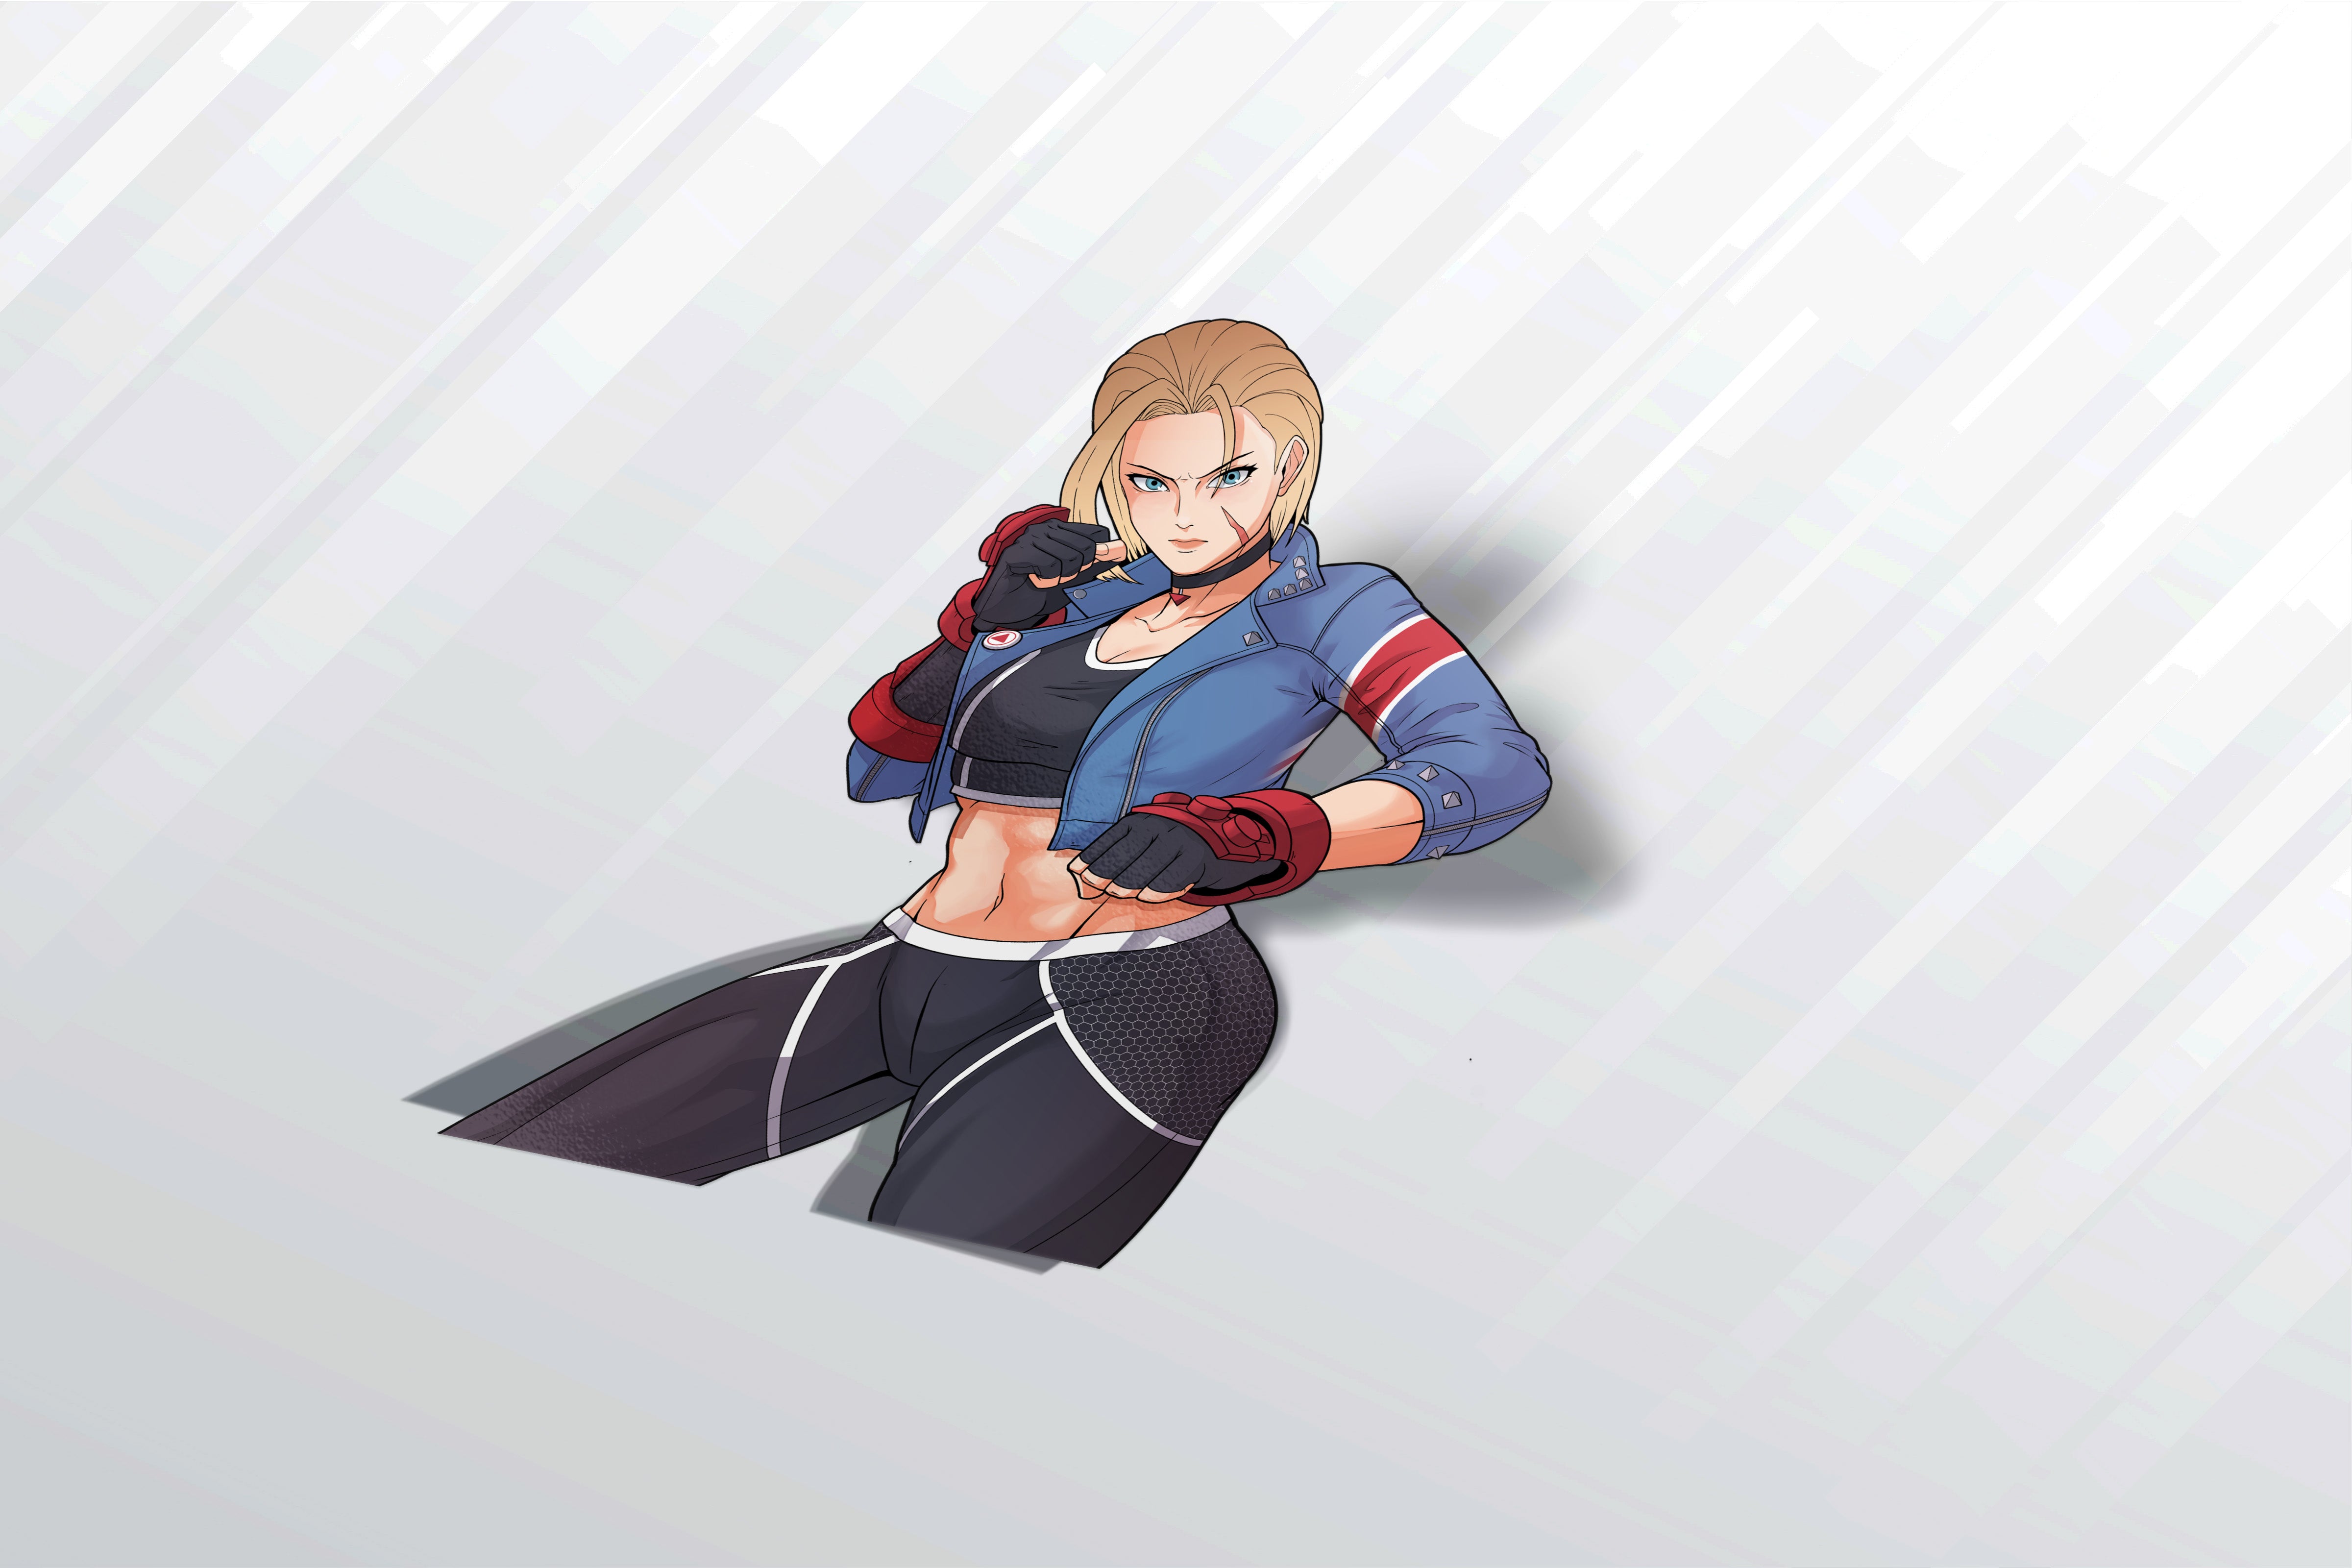 Cammy (SF6) Defeated Face Sticker